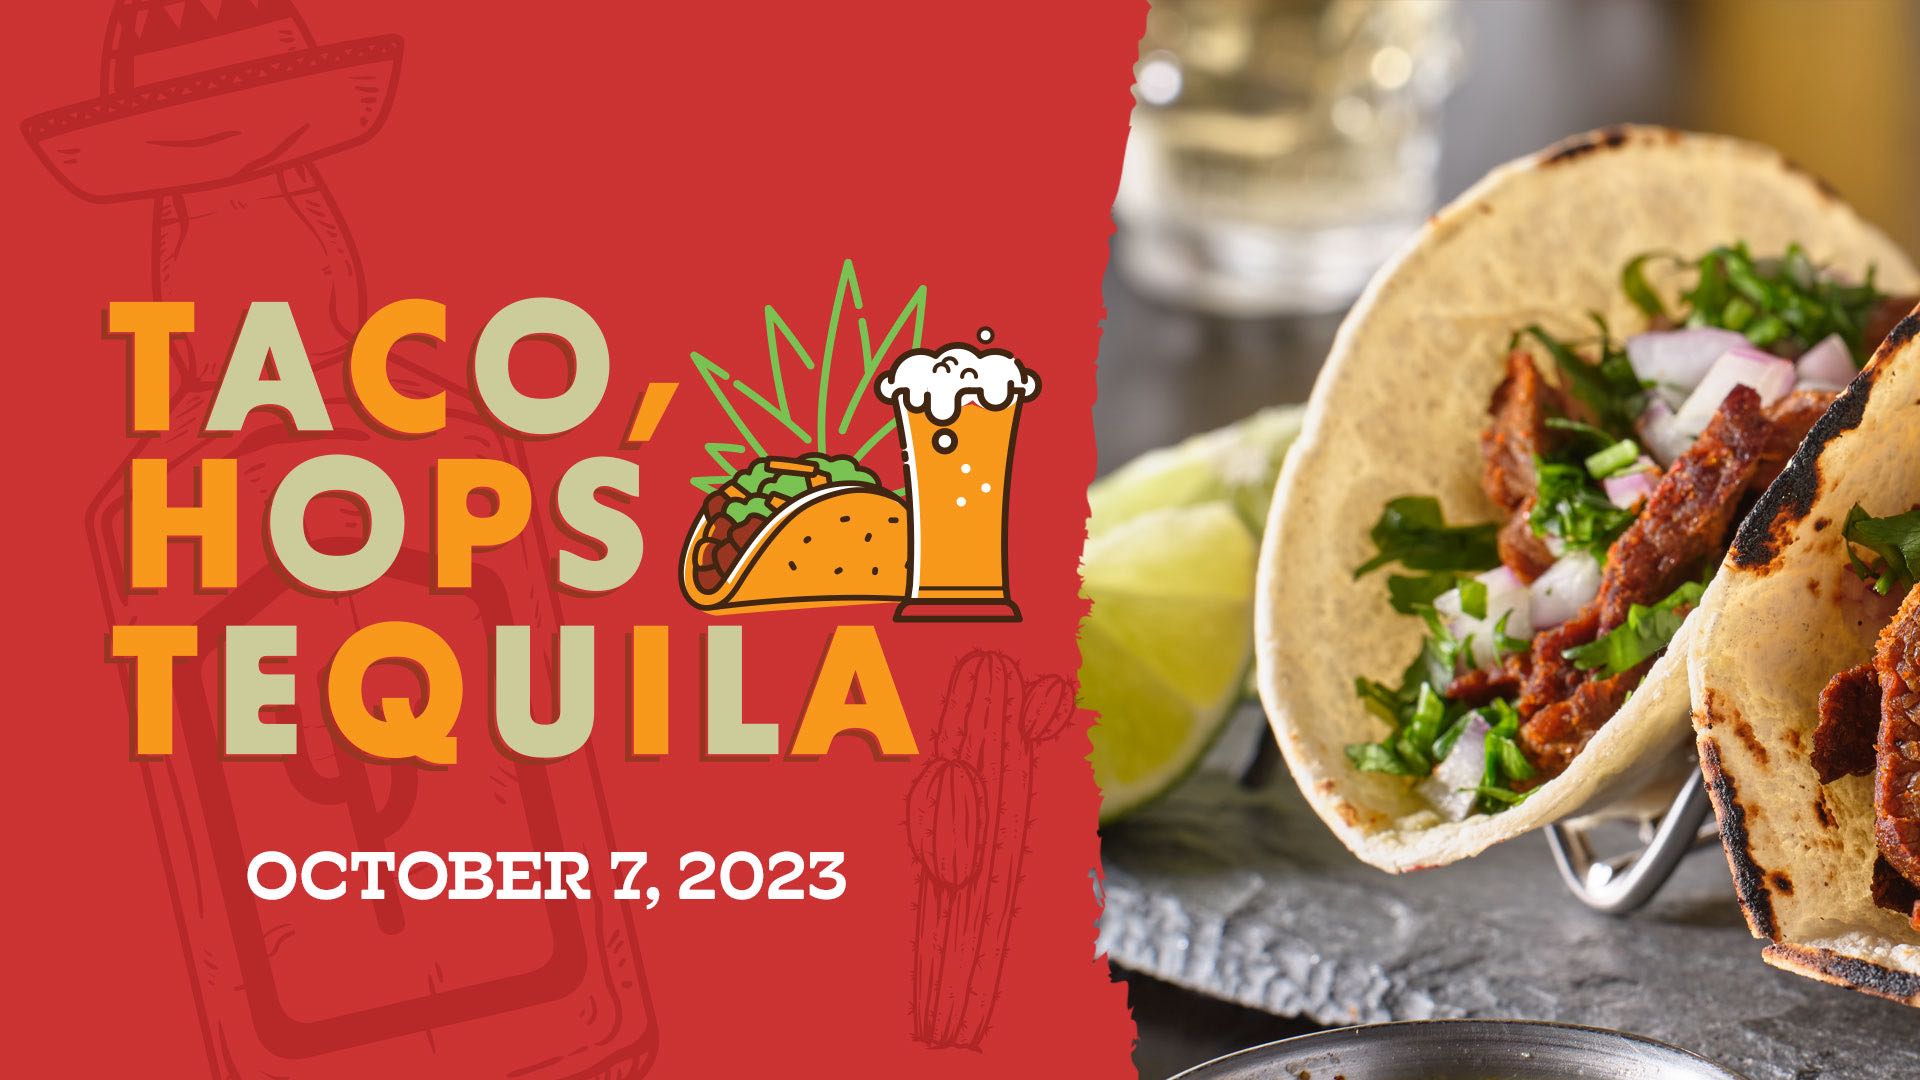 Taco, Hops & Tequila October 7, 2023 event logo overlaying image of yummy tacos